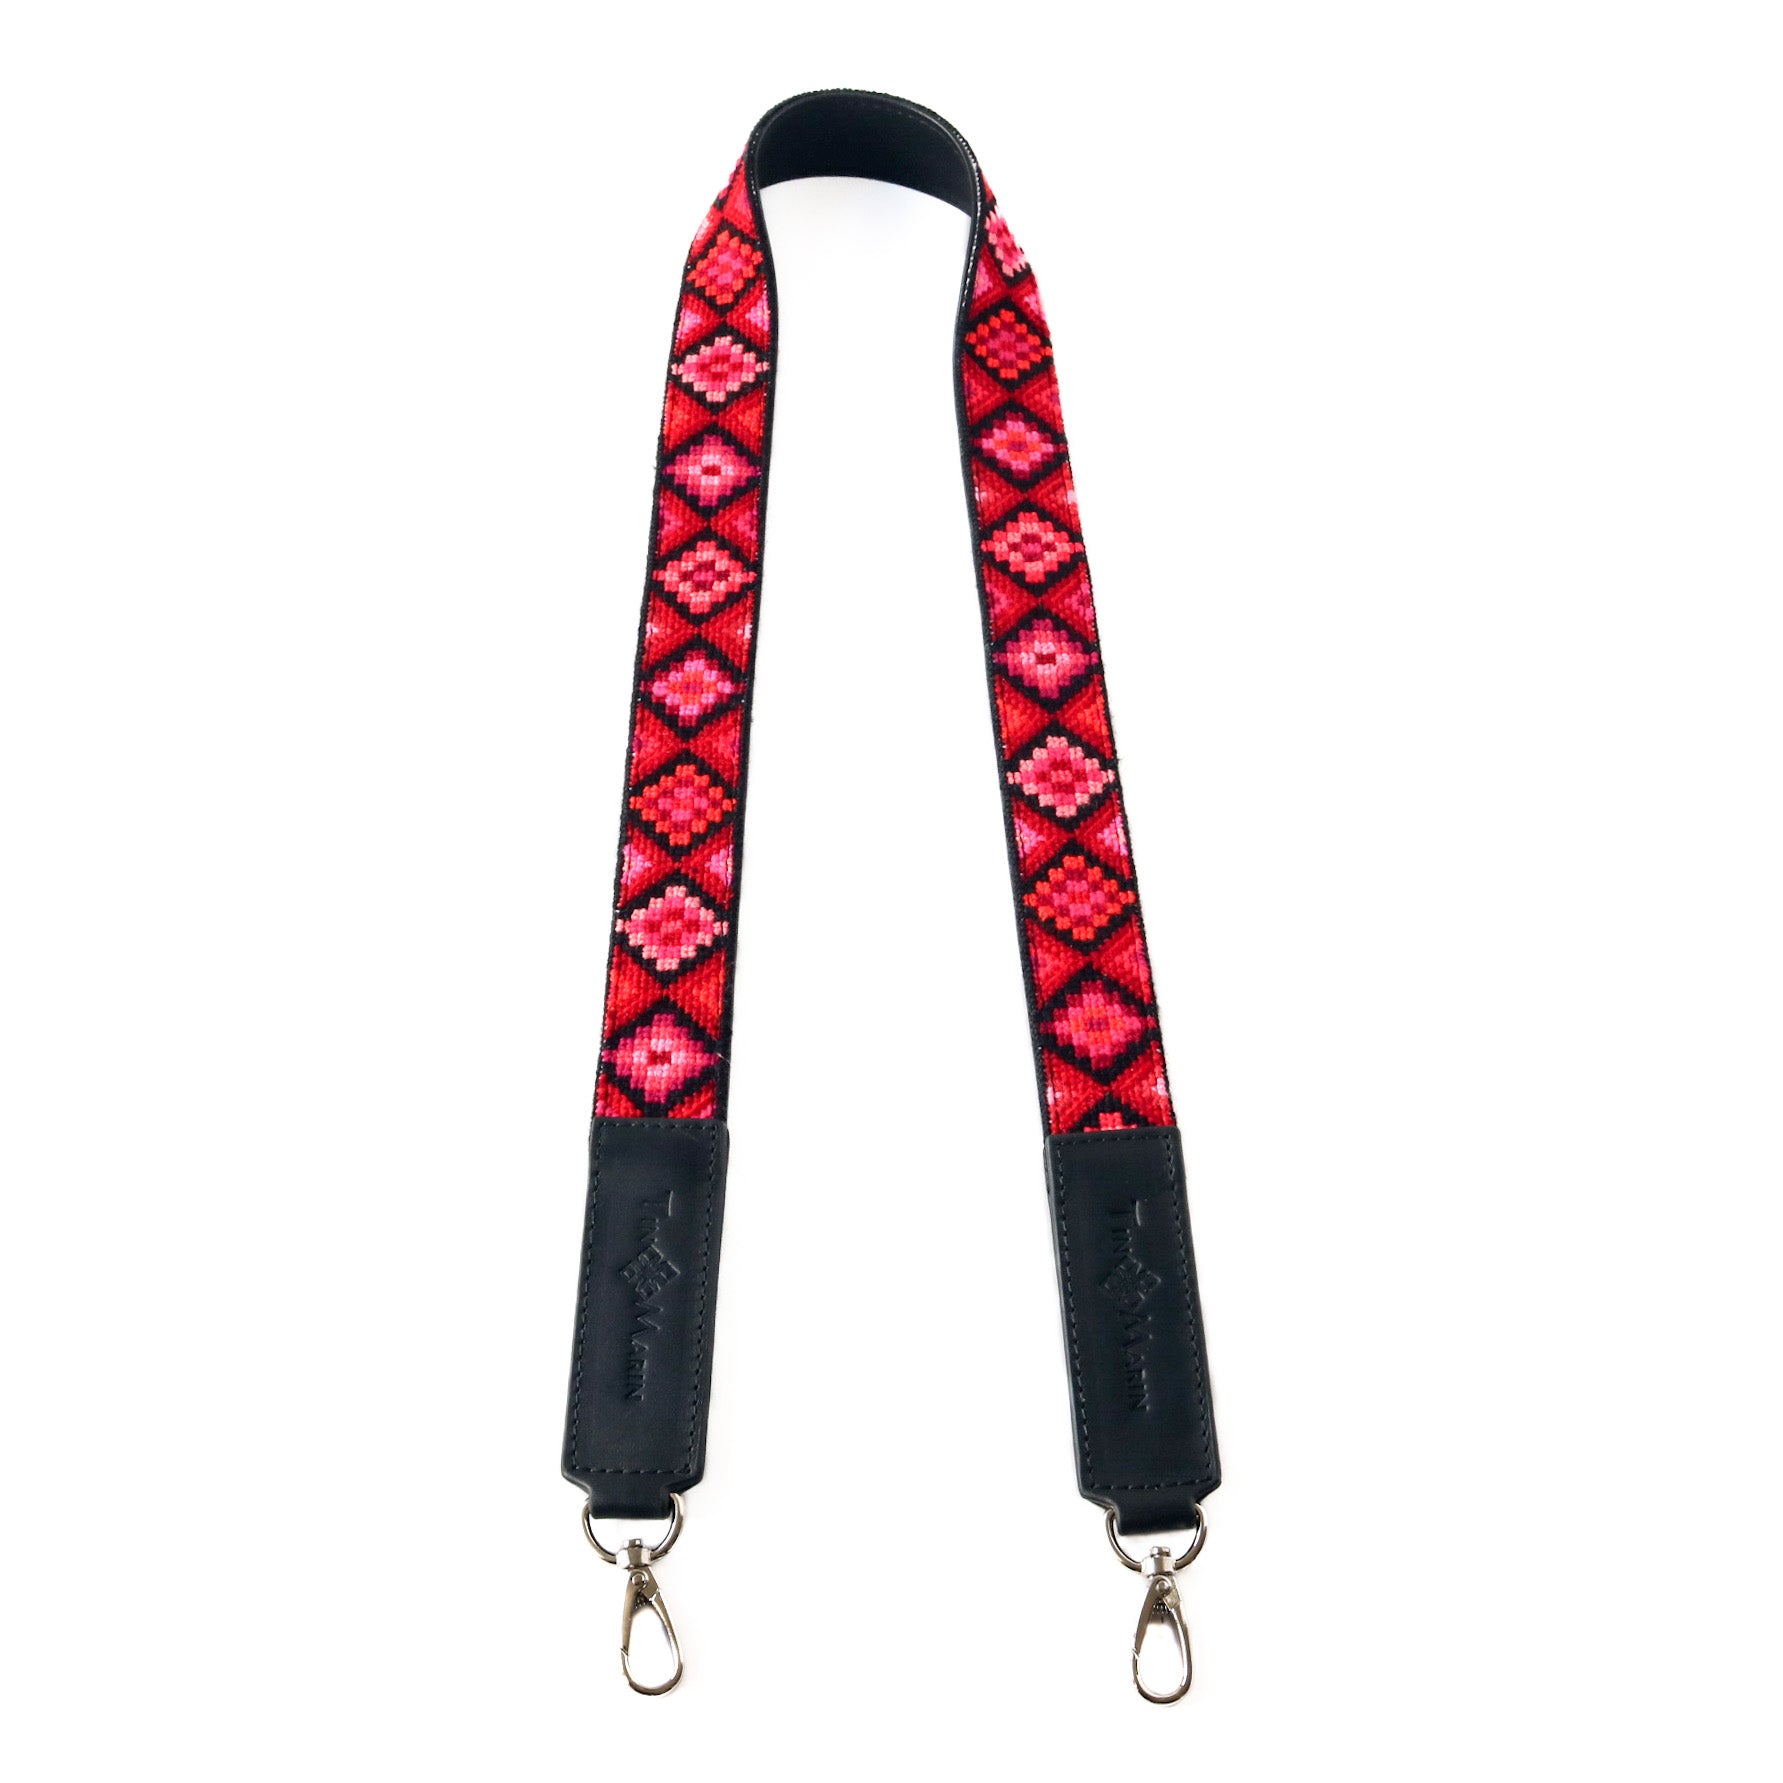 Leather Braided Bag Strap, Red